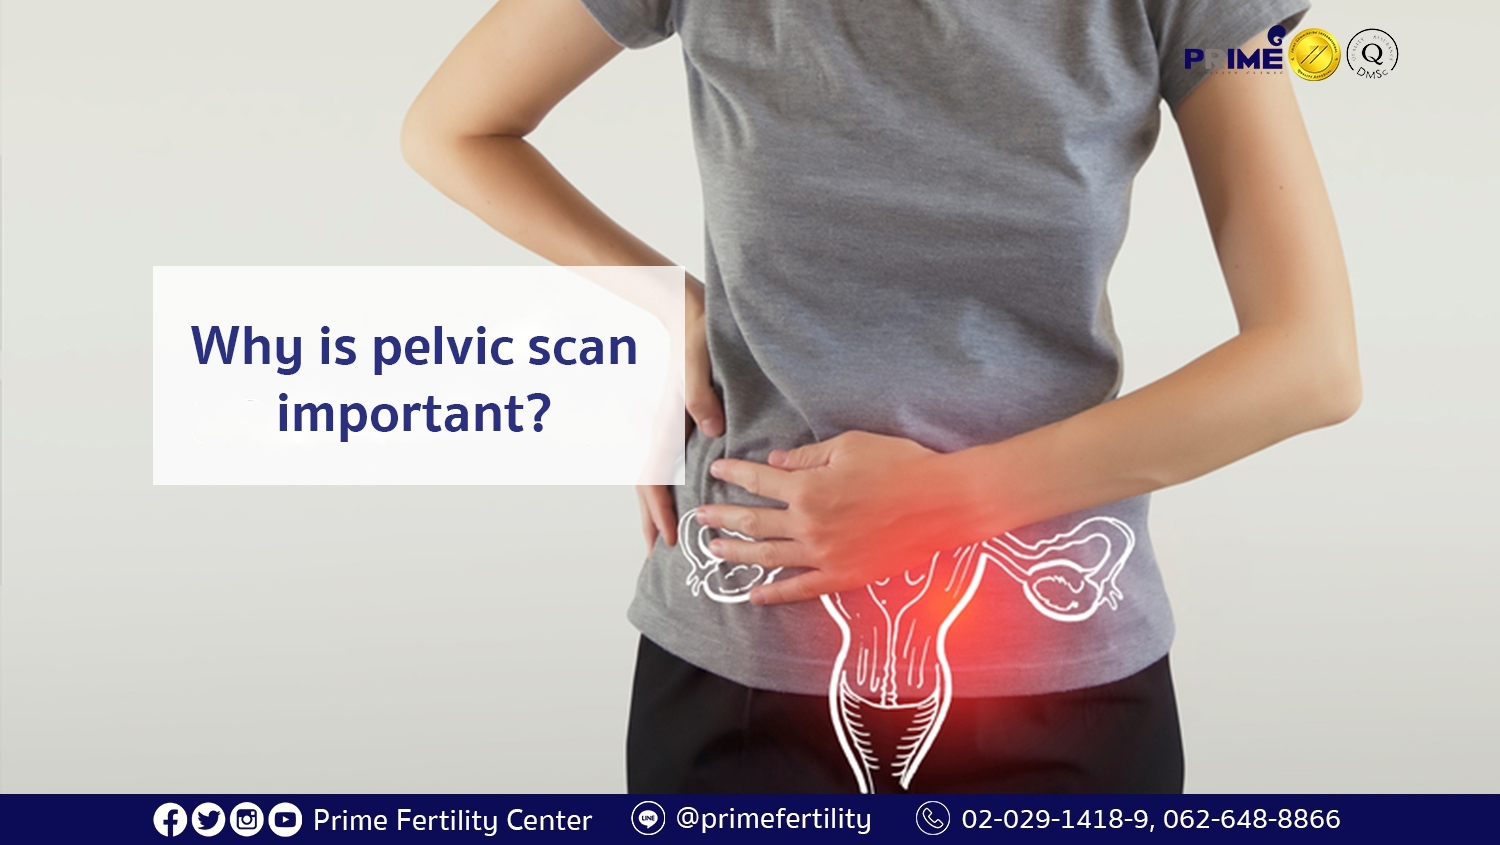 Why is pelvic scan important?